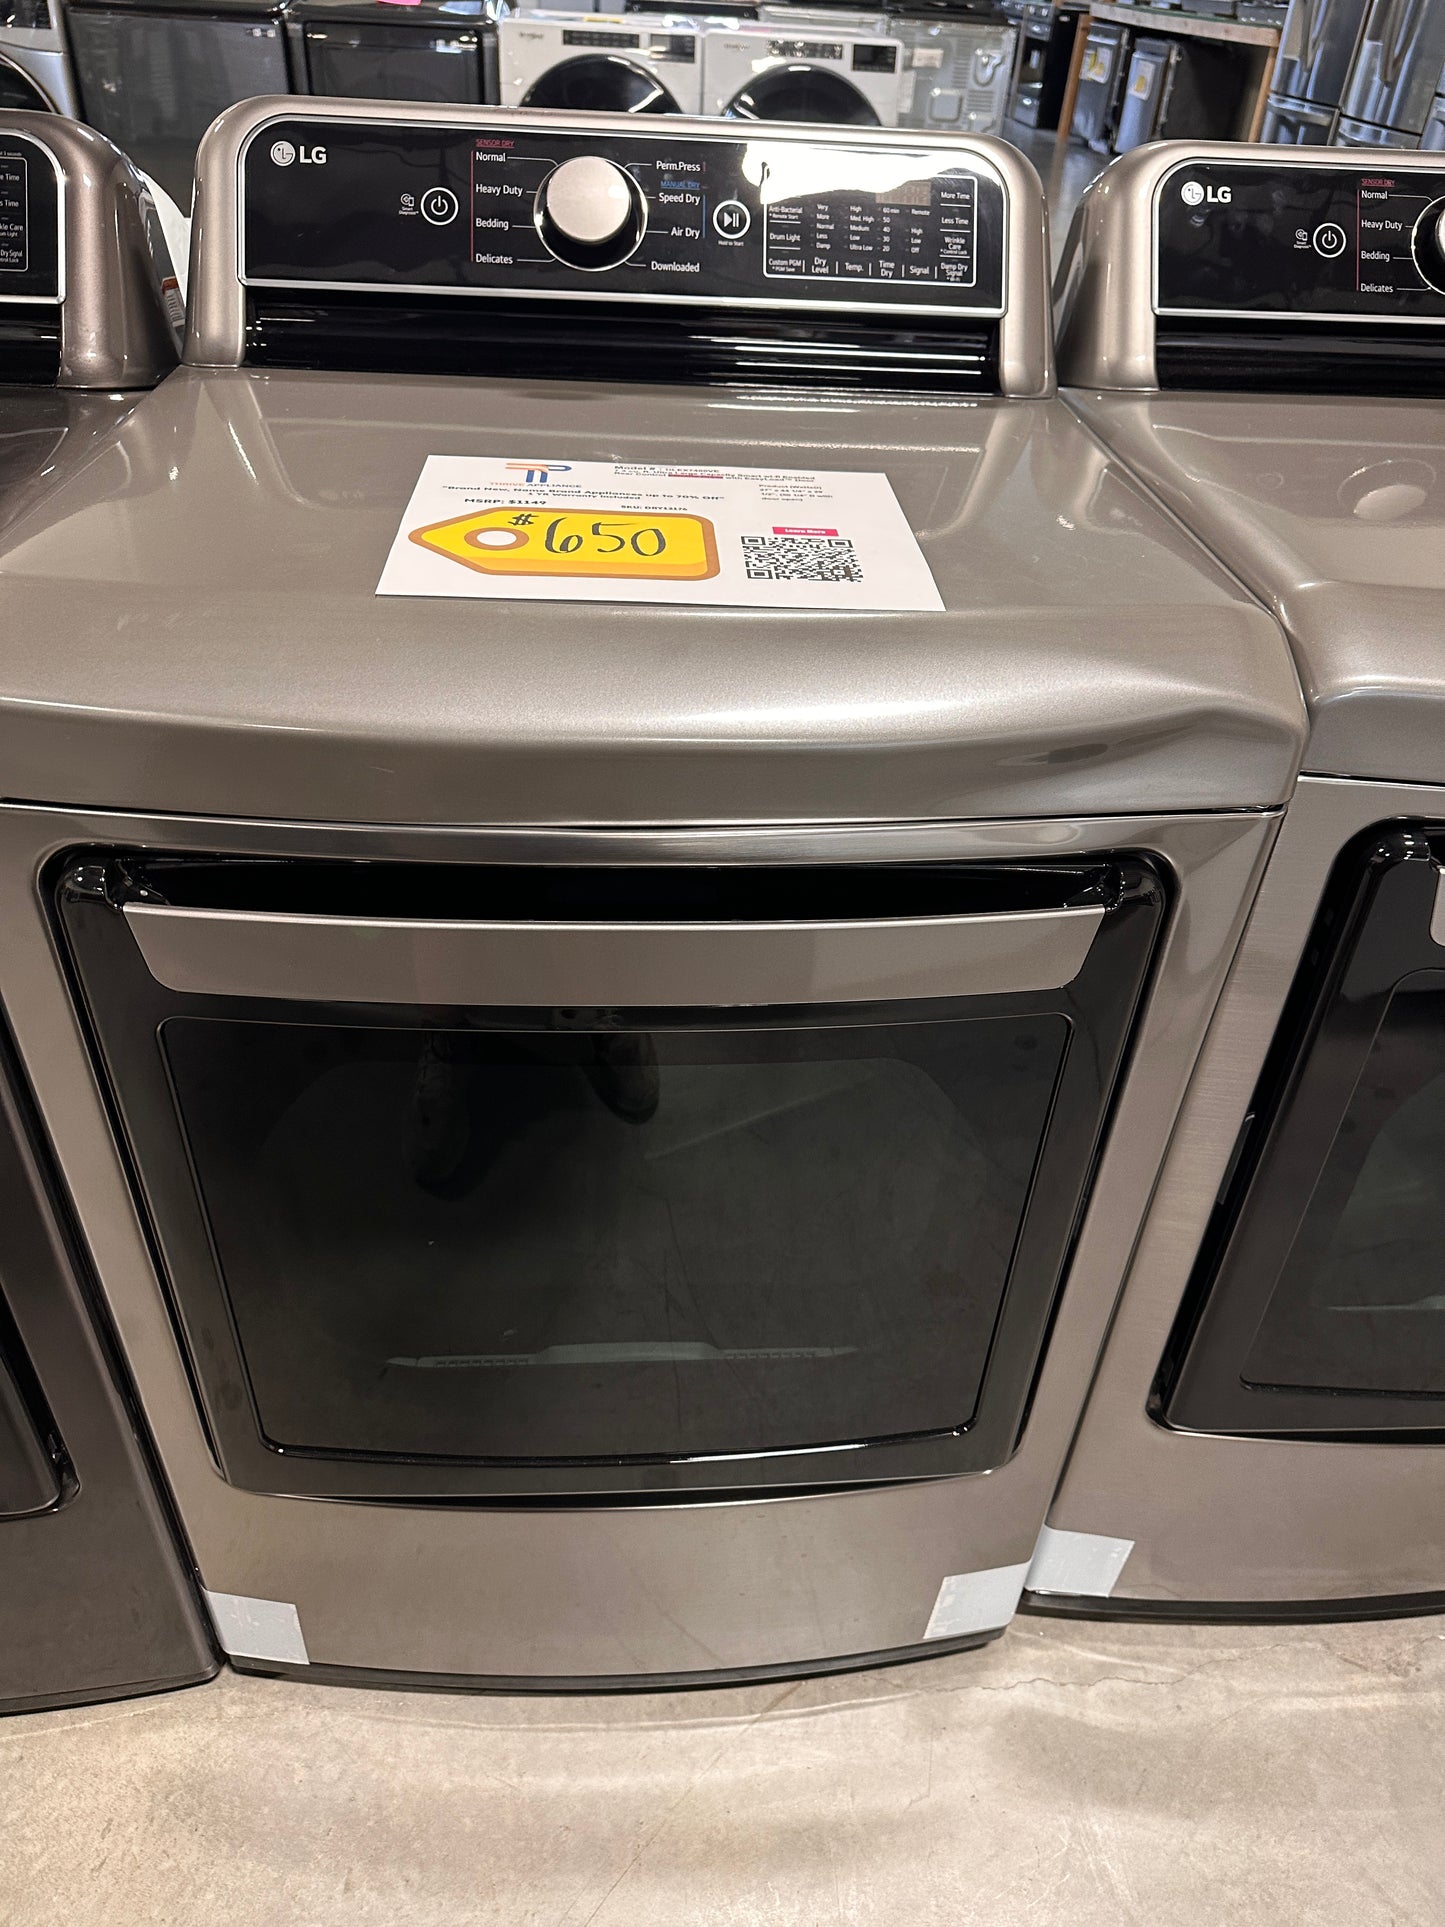 ELECTRIC DRYER with EASY LOAD DOOR - DRY12176 DLE7400VE